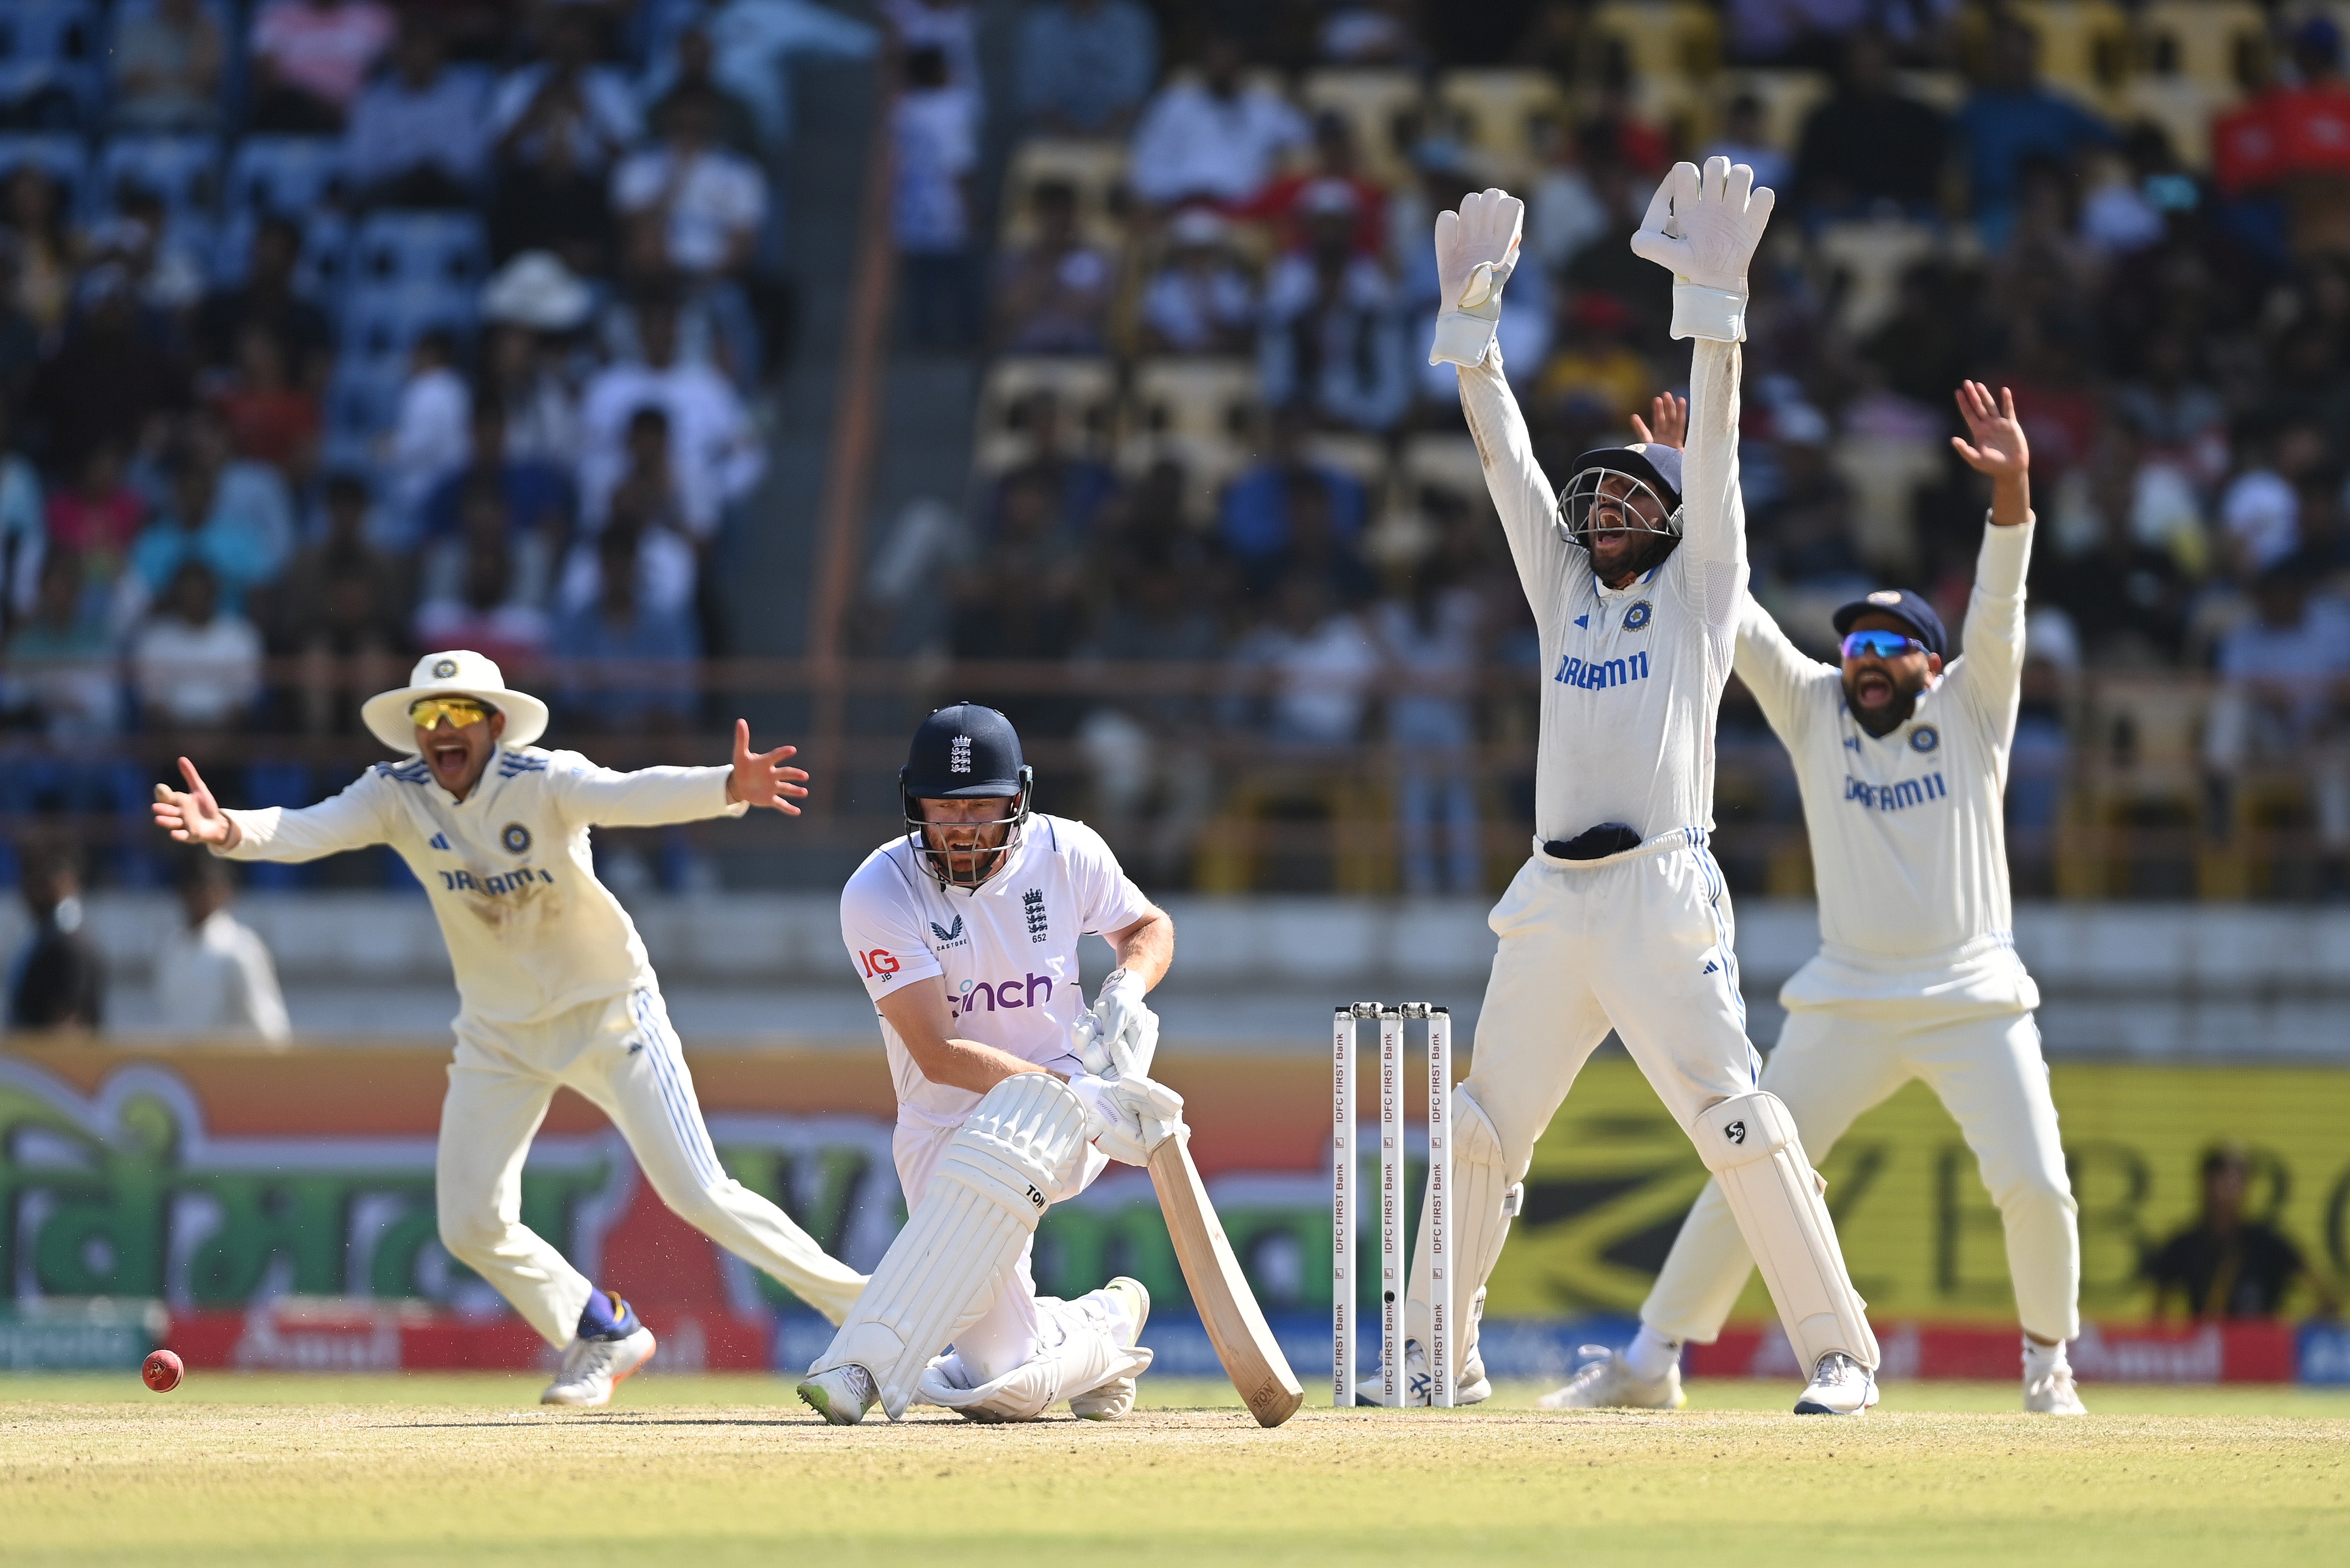 India have secured series victory ahead of the final Test